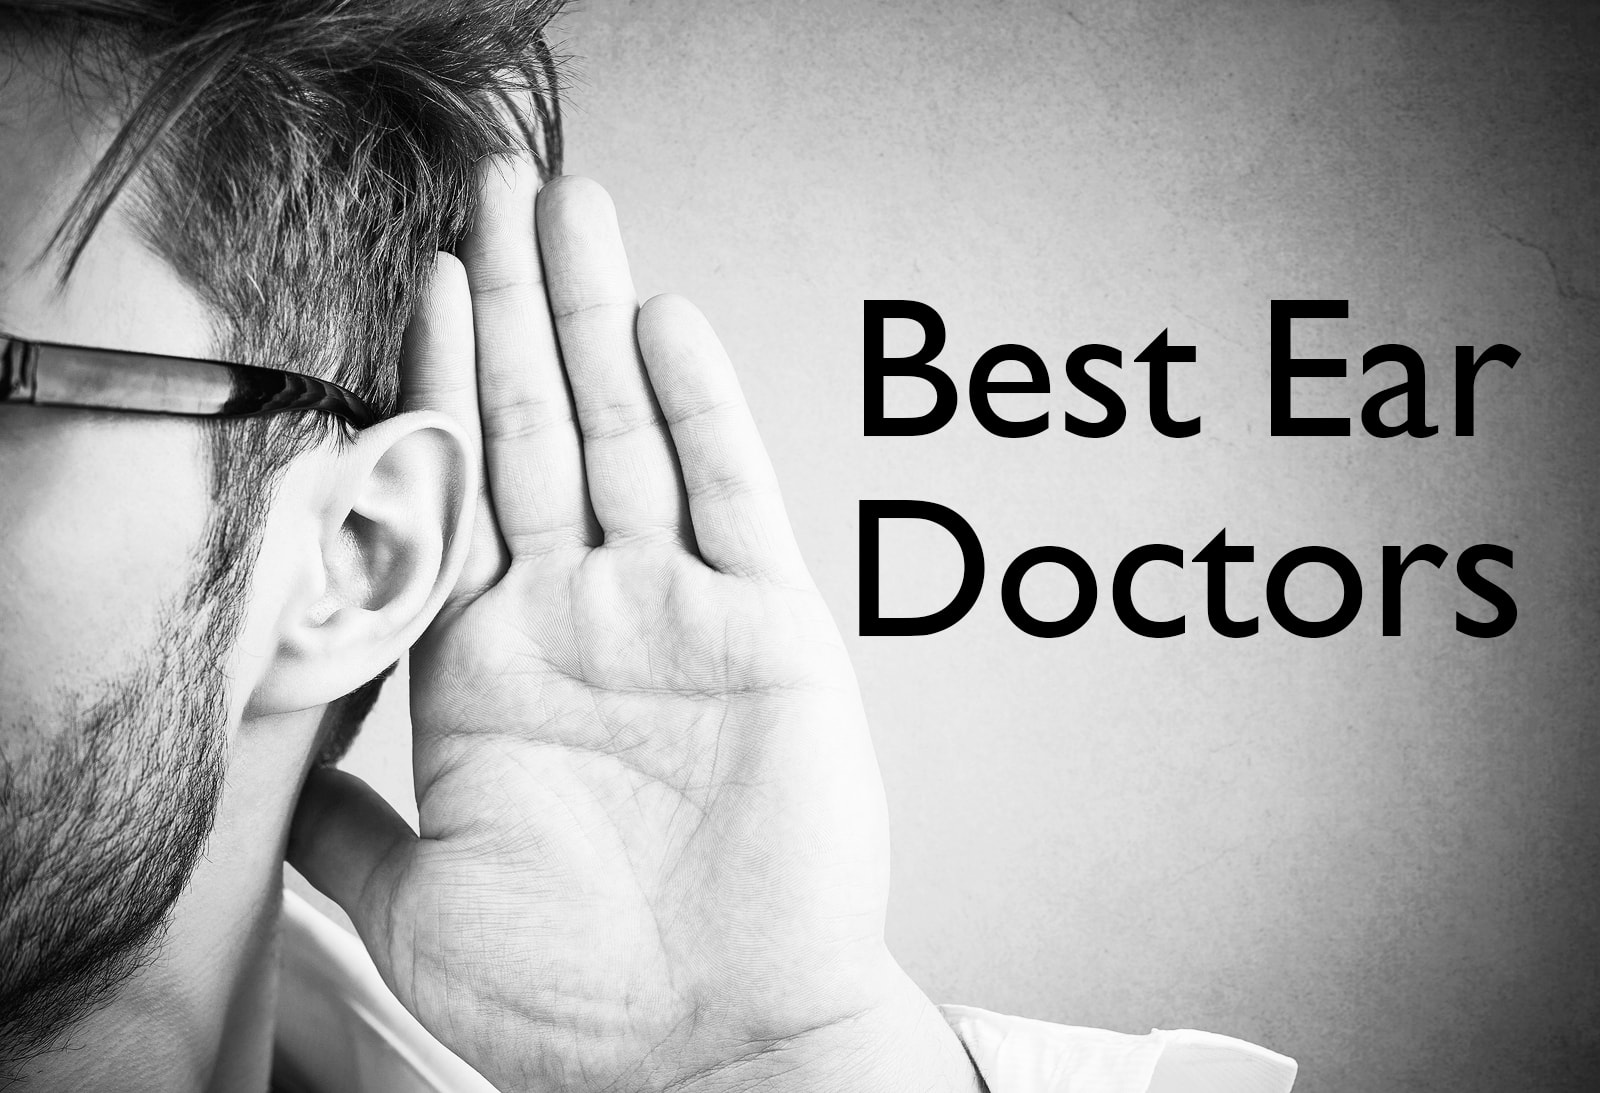 Who are the best ear surgeons in San Diego